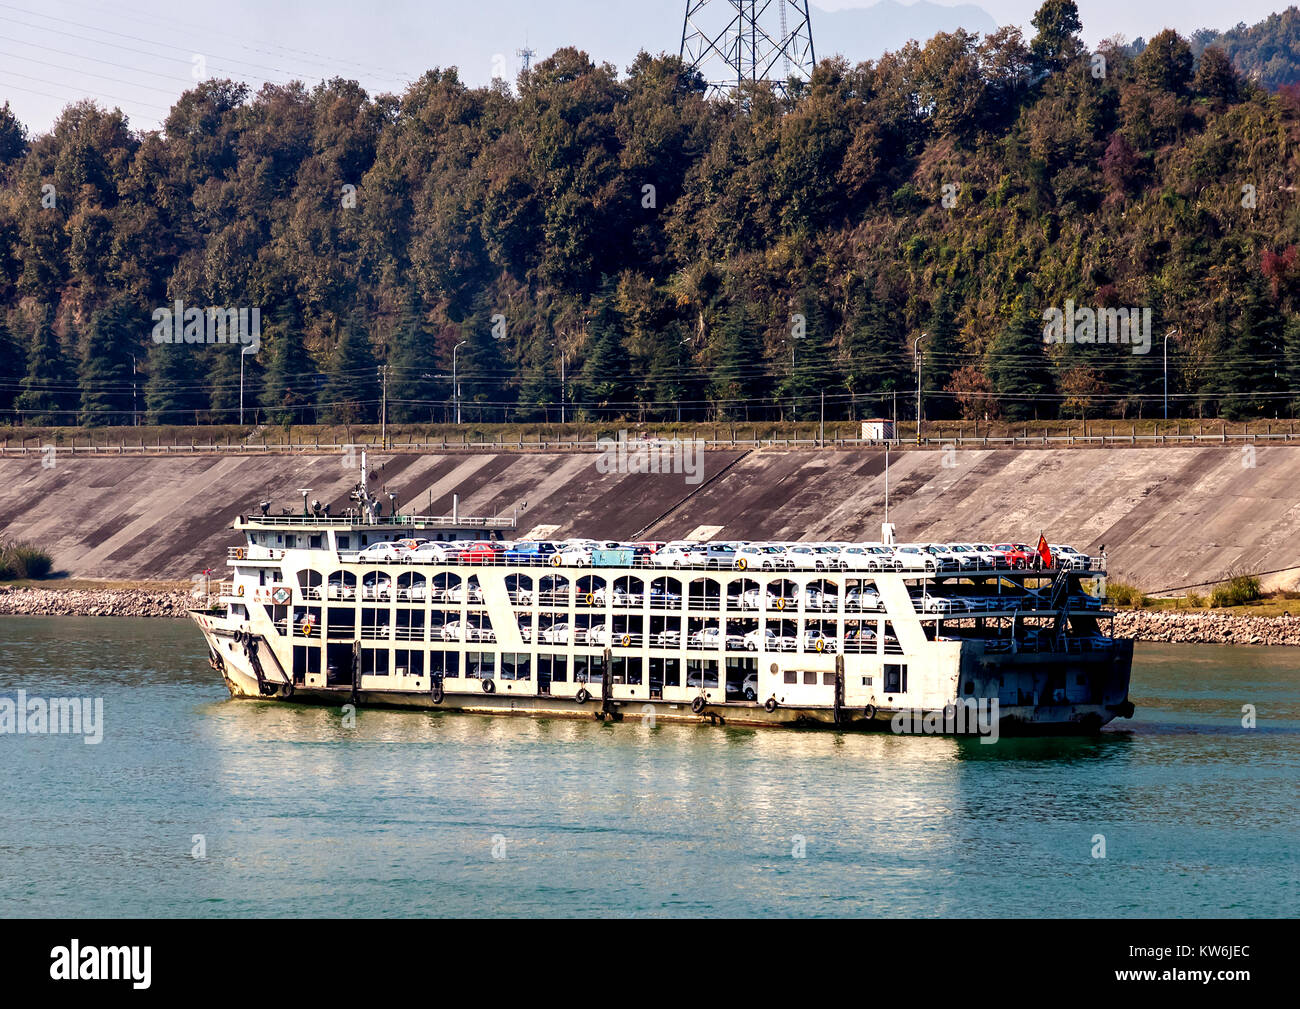 Dozens of cars being transported by boat on Yangtze River in China Stock Photo